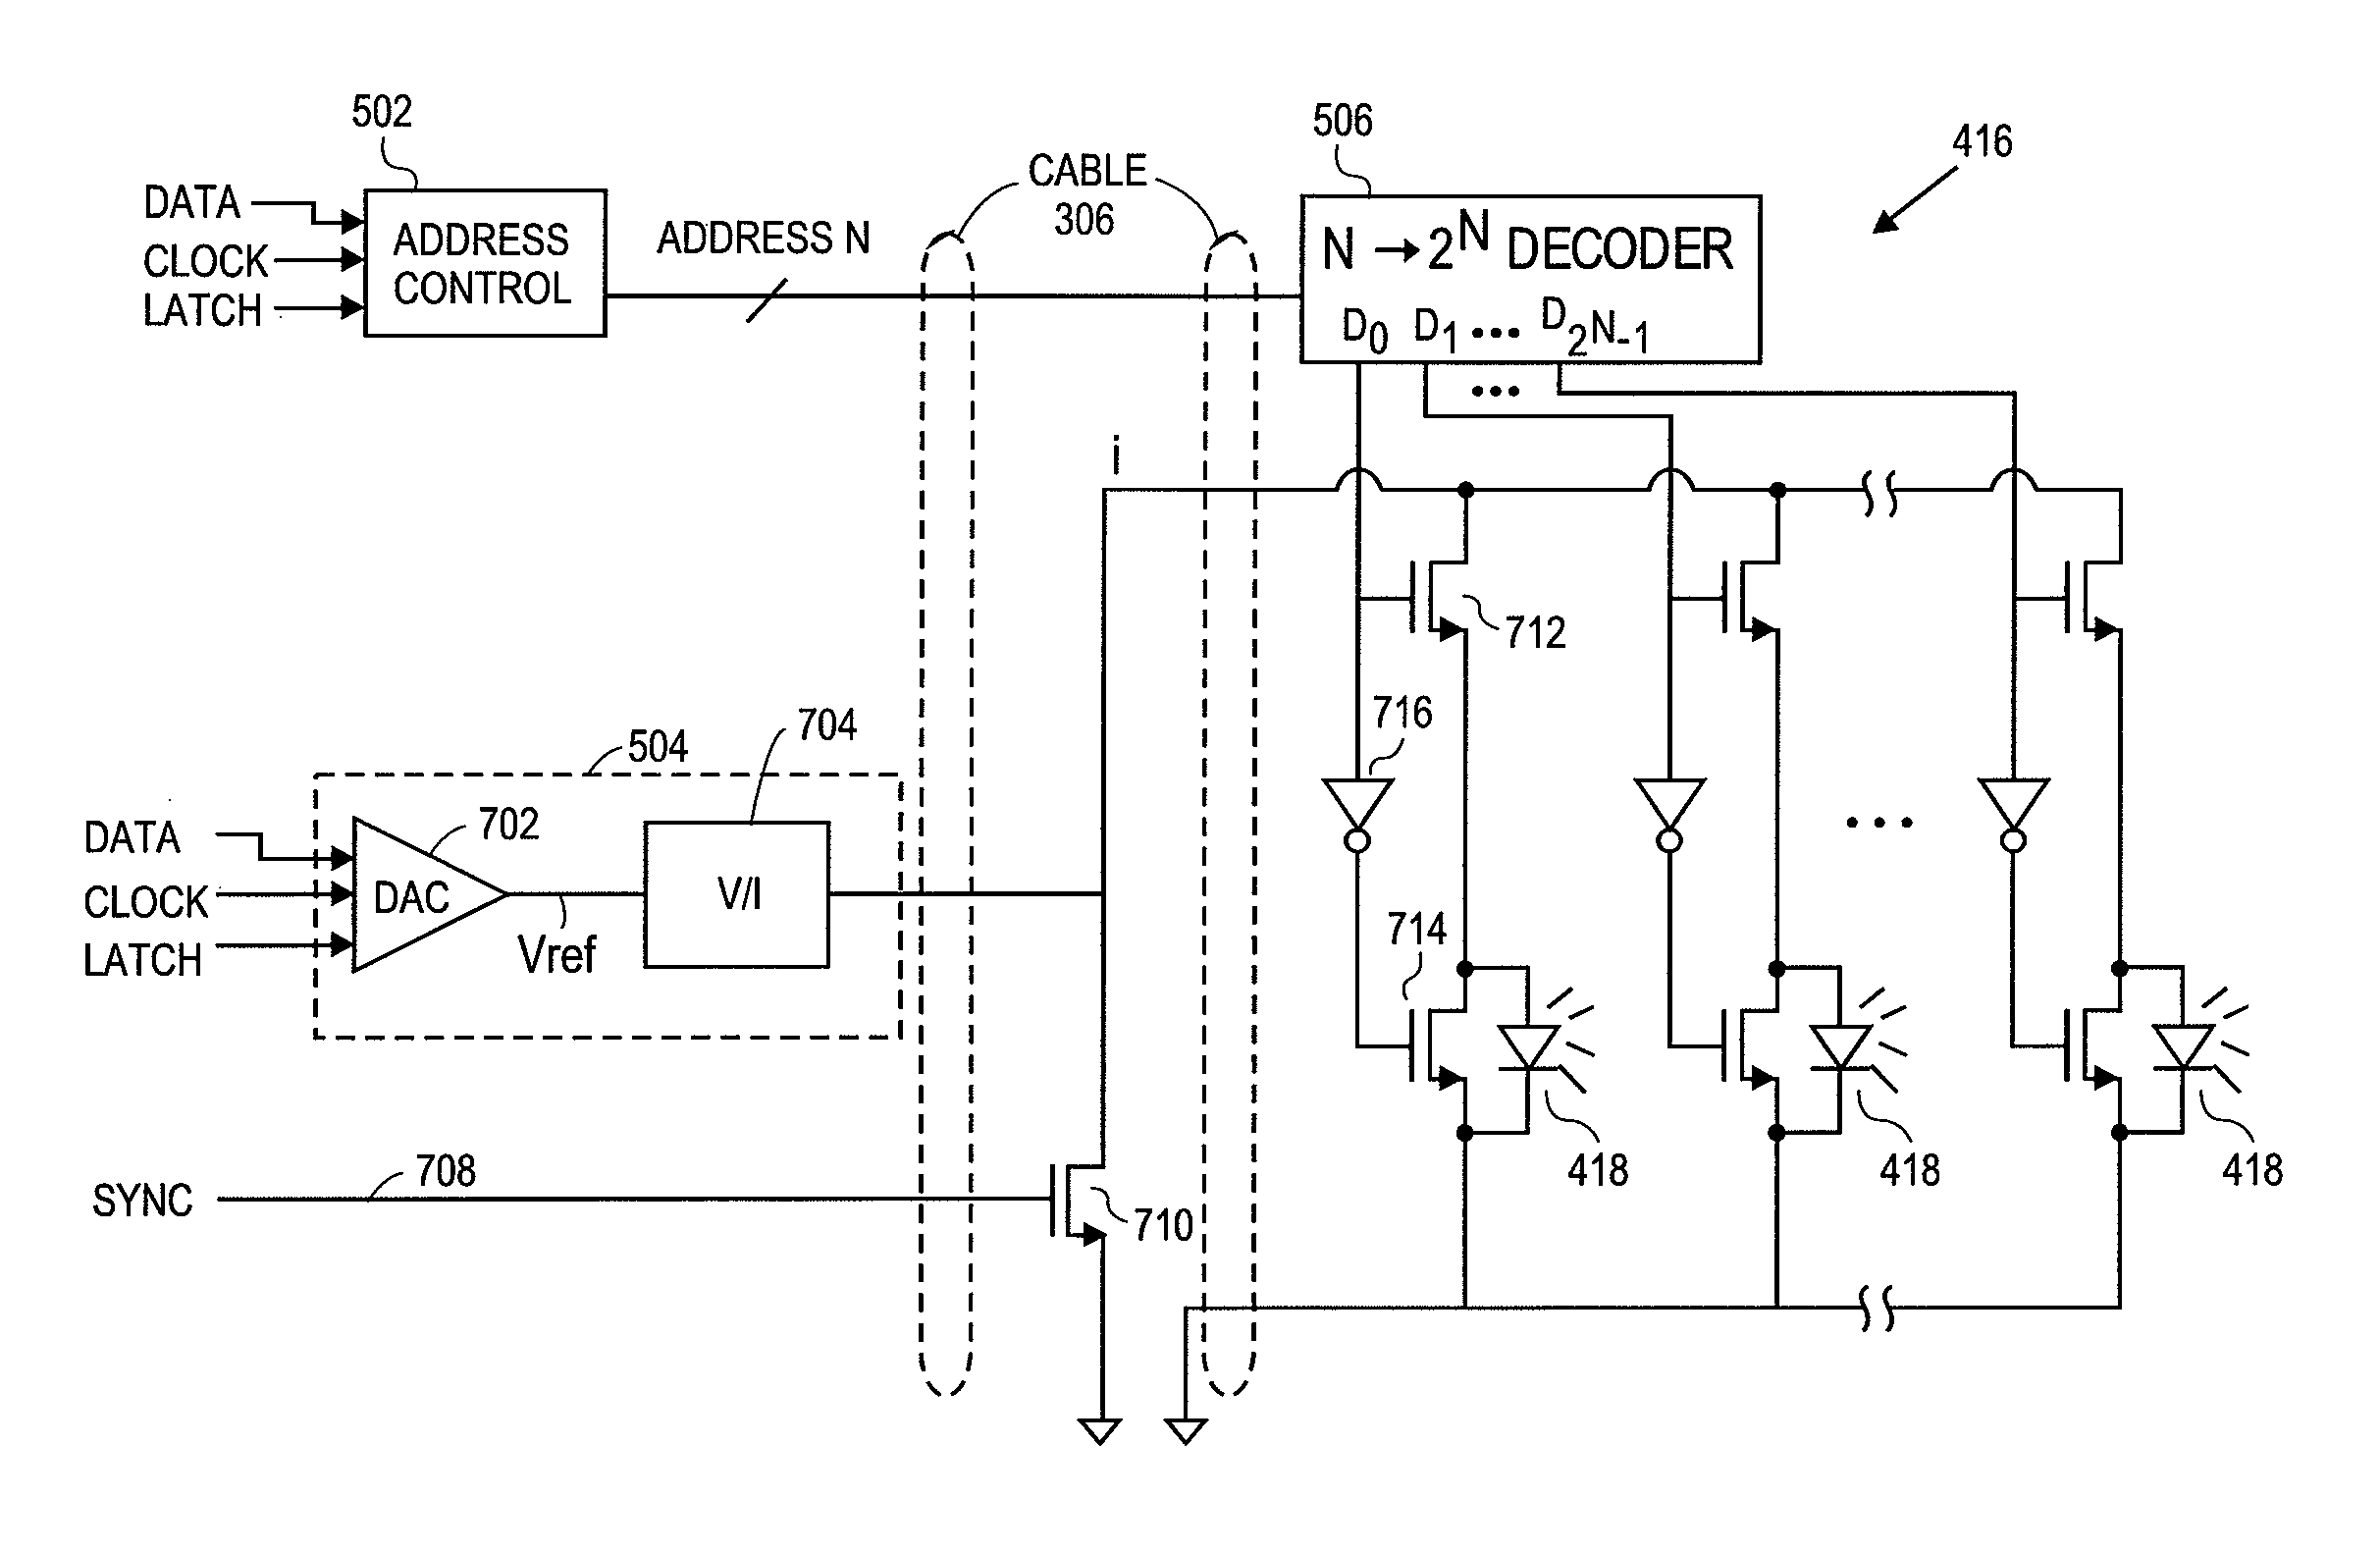 Emitter driver for noninvasive patient monitor